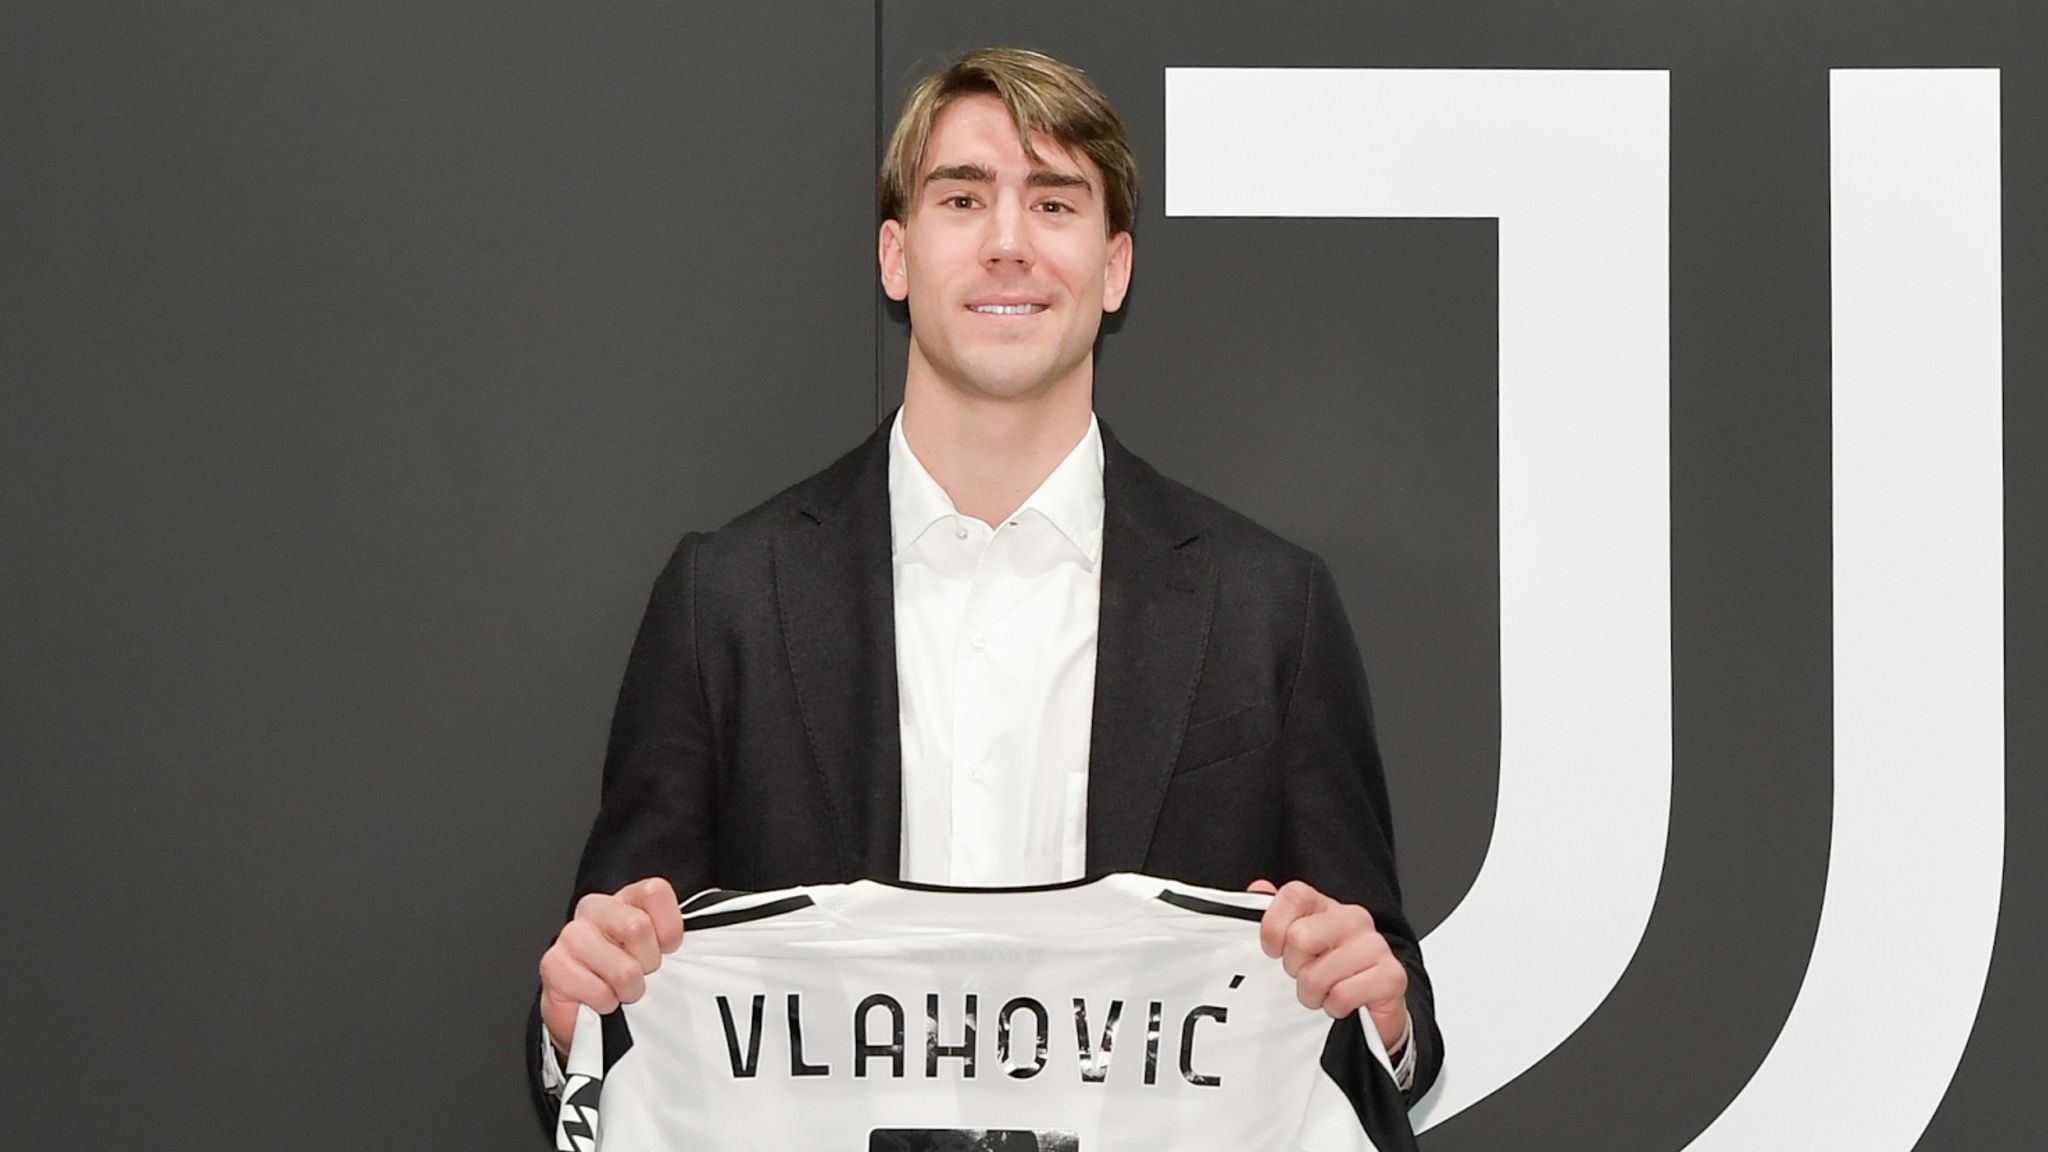  “The club and I have a similar DNA” – Vlahovic unveiled at Juventus